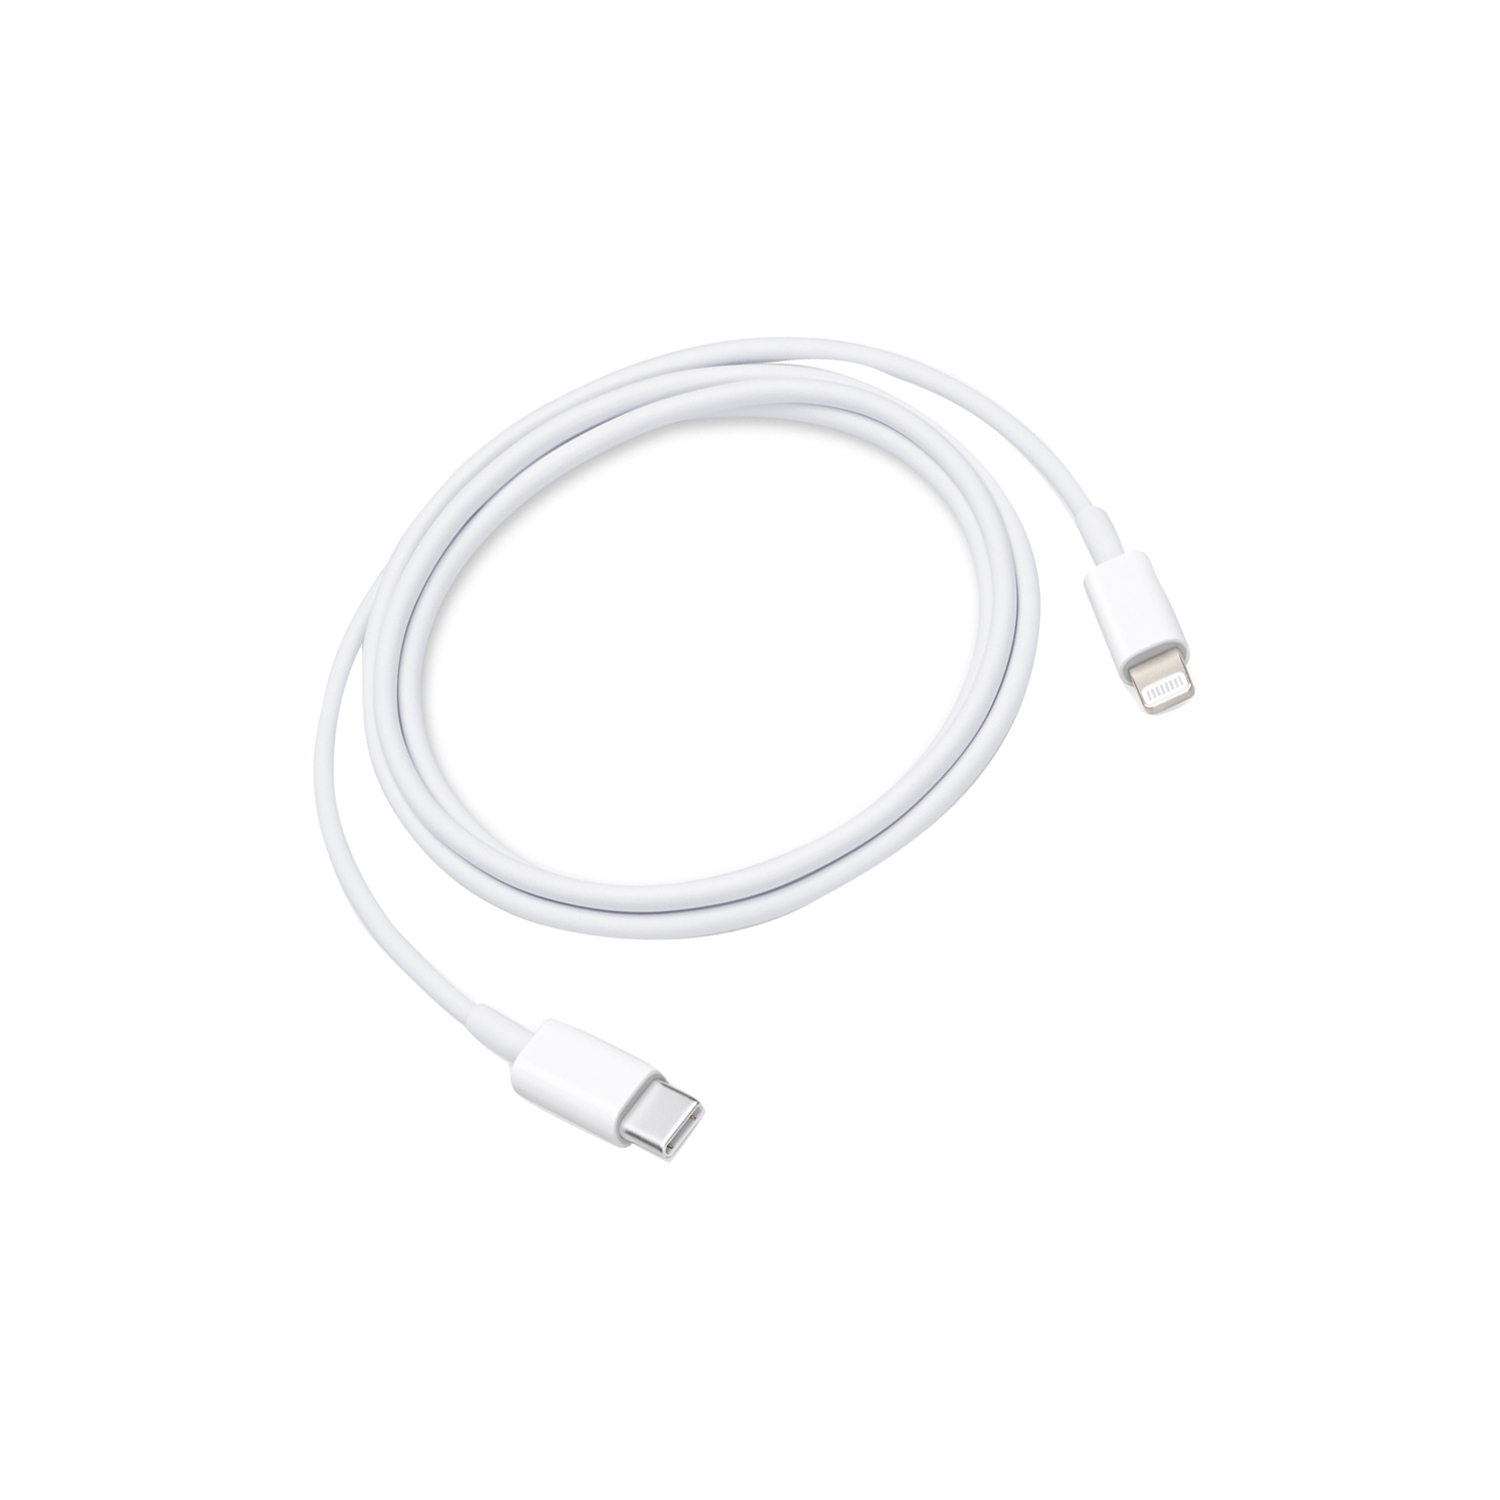 Lightning Cable To Type C Fast Charging Charger Cable For Apple iPhone 11/12/13 Series iPad 7/8/9/11 Pro/12 pro - White